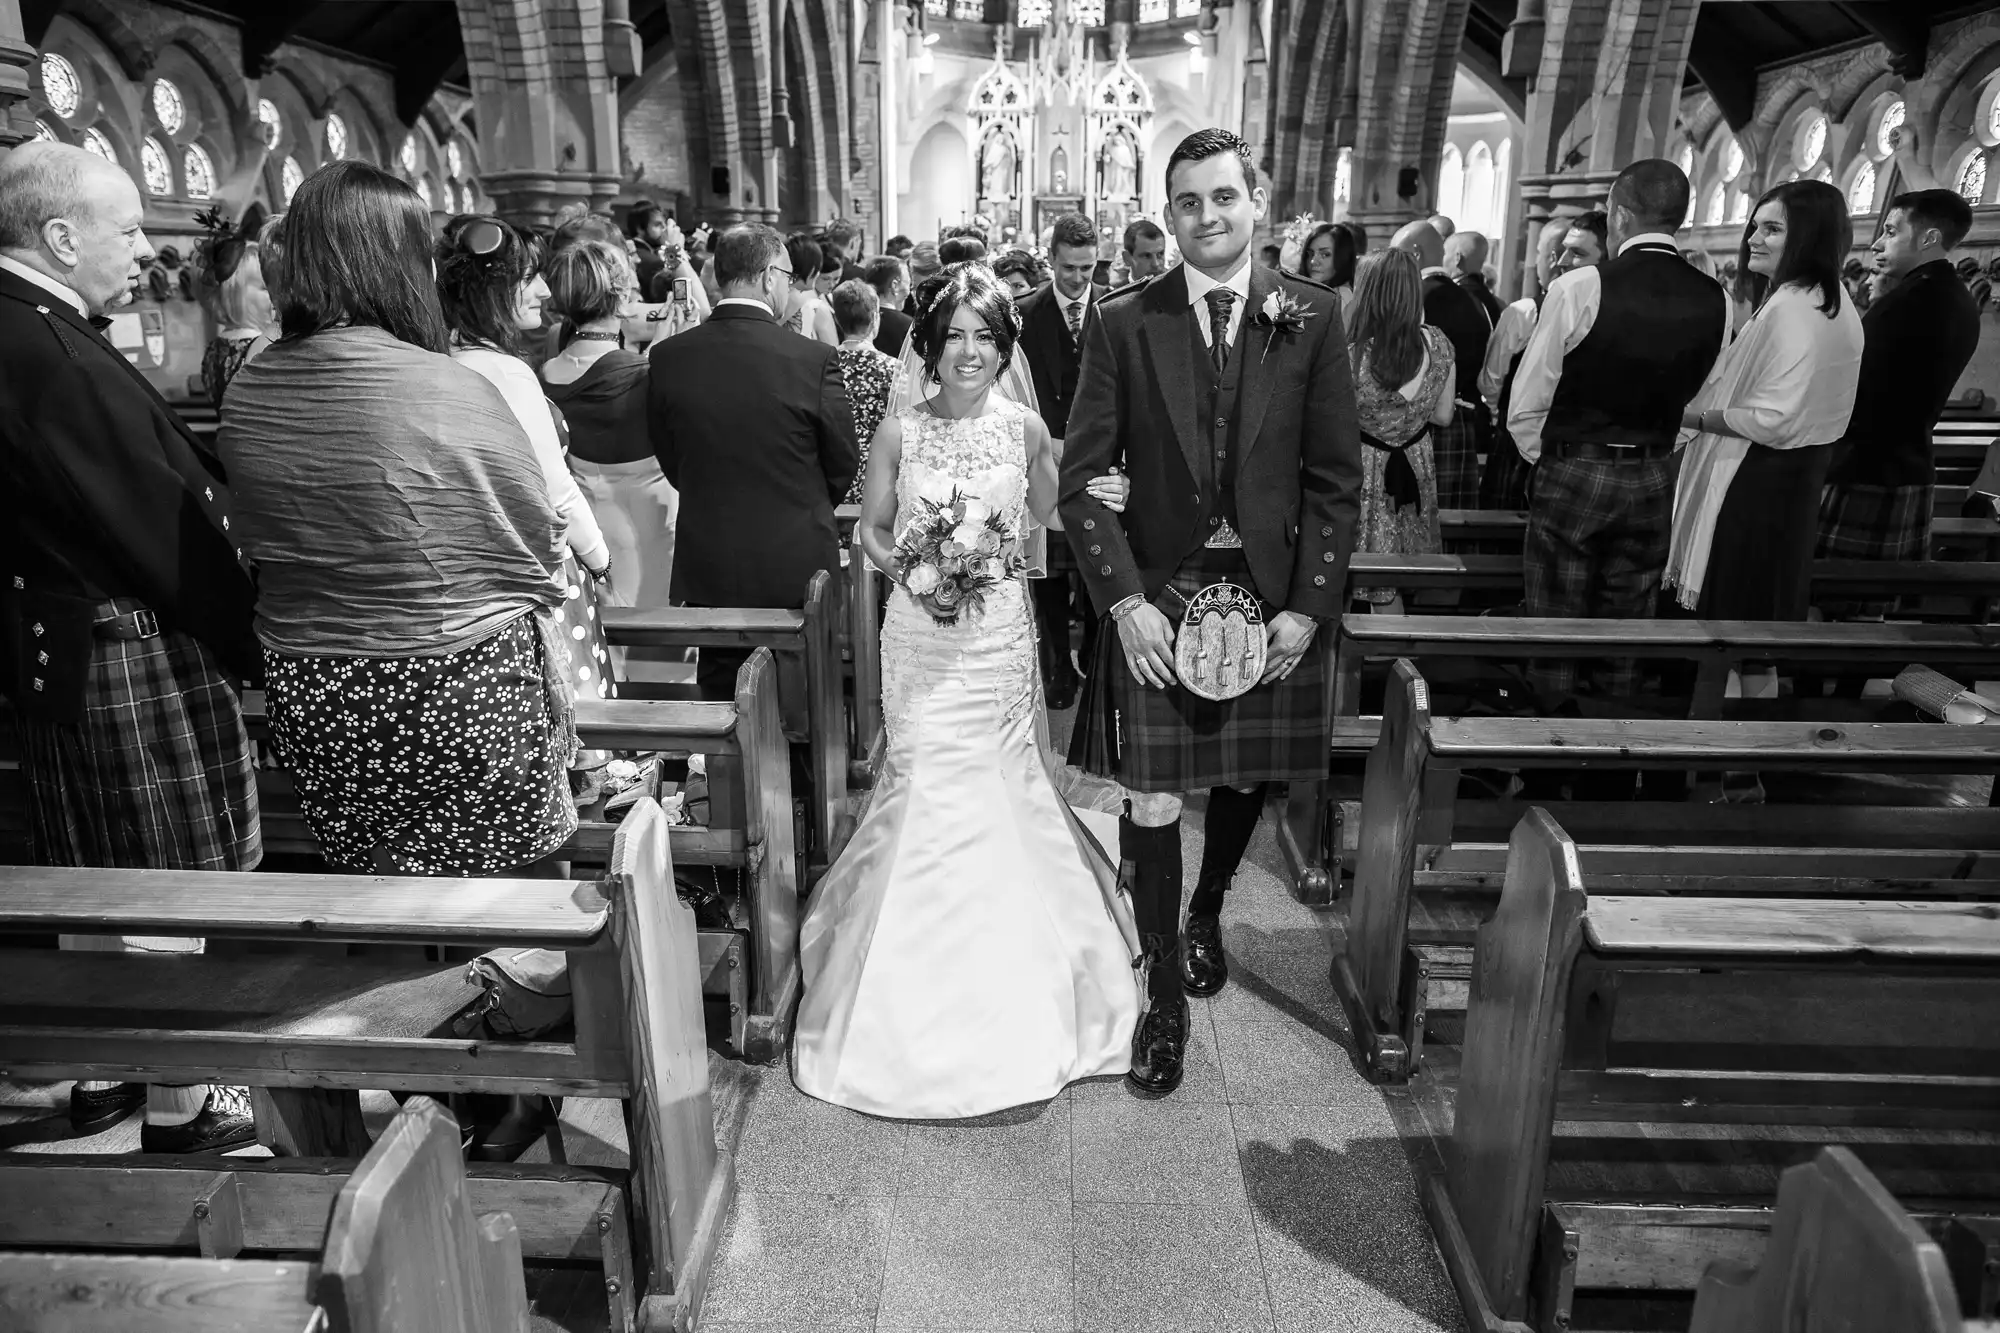 A bride and groom in a church, smiling as they walk down the aisle, surrounded by guests; the groom is wearing a kilt.